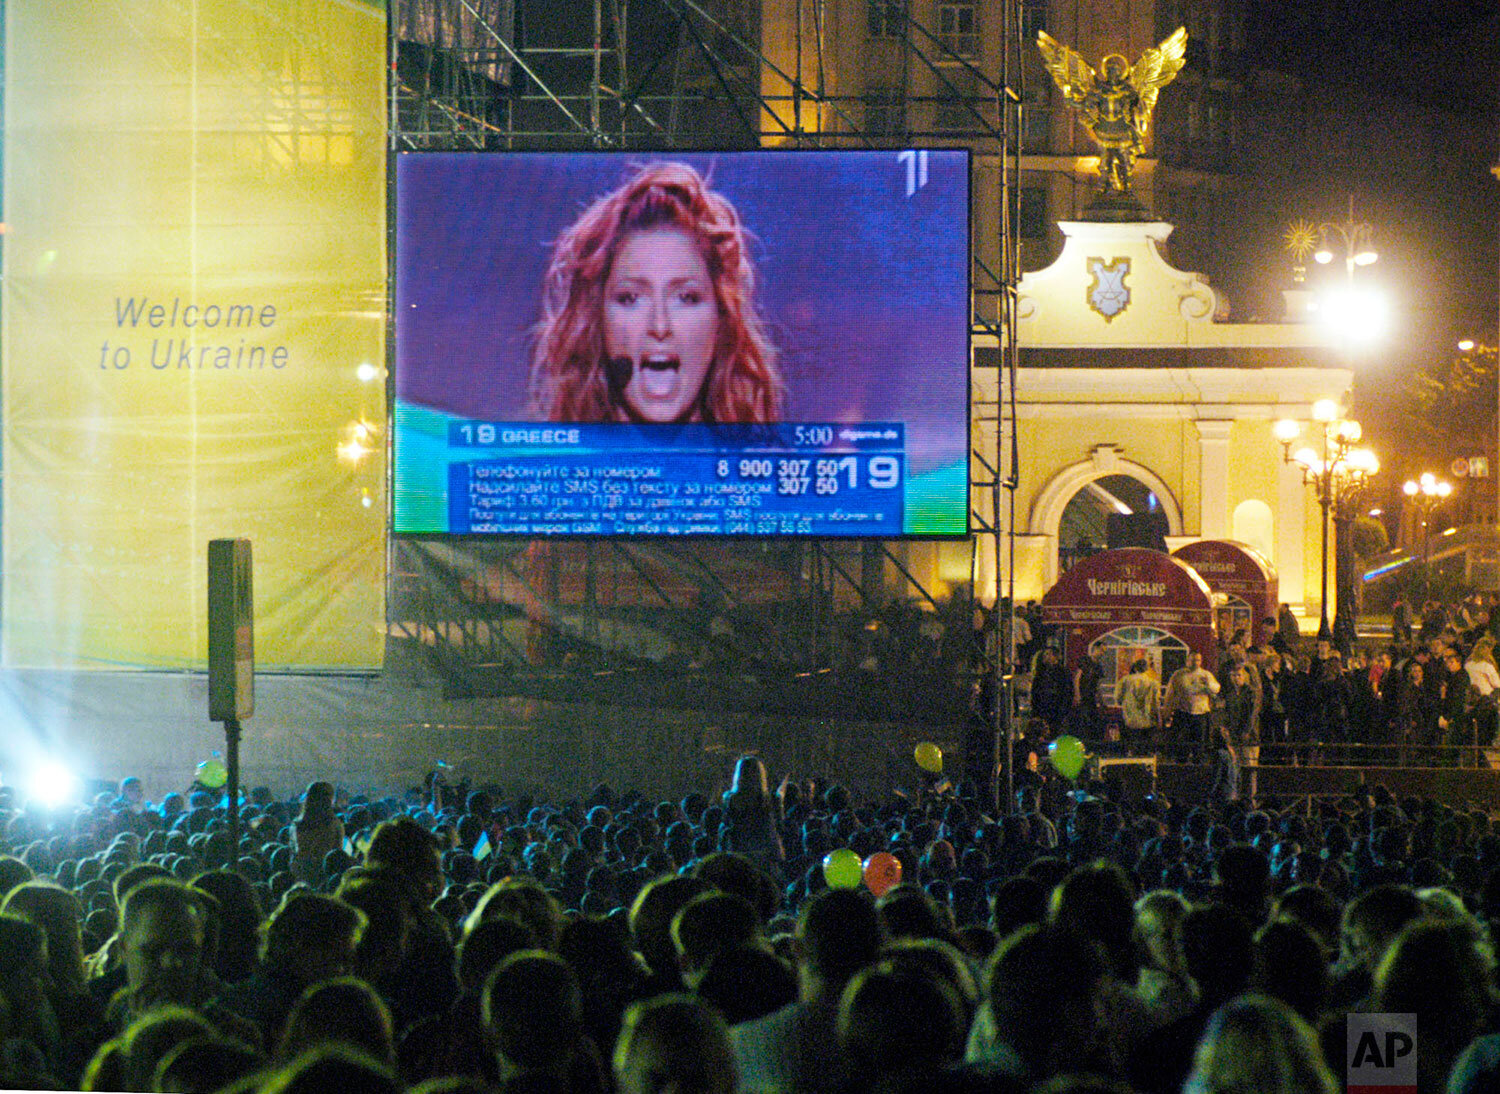  Ukrainians watch winner of the contest Helena Paparizou of Greece  performing during the finale of the Eurovision song contest on a giant screen in downtown Kiev, Saturday, May 21, 2005. (AP Photo/Sergei Chuzavkov) 